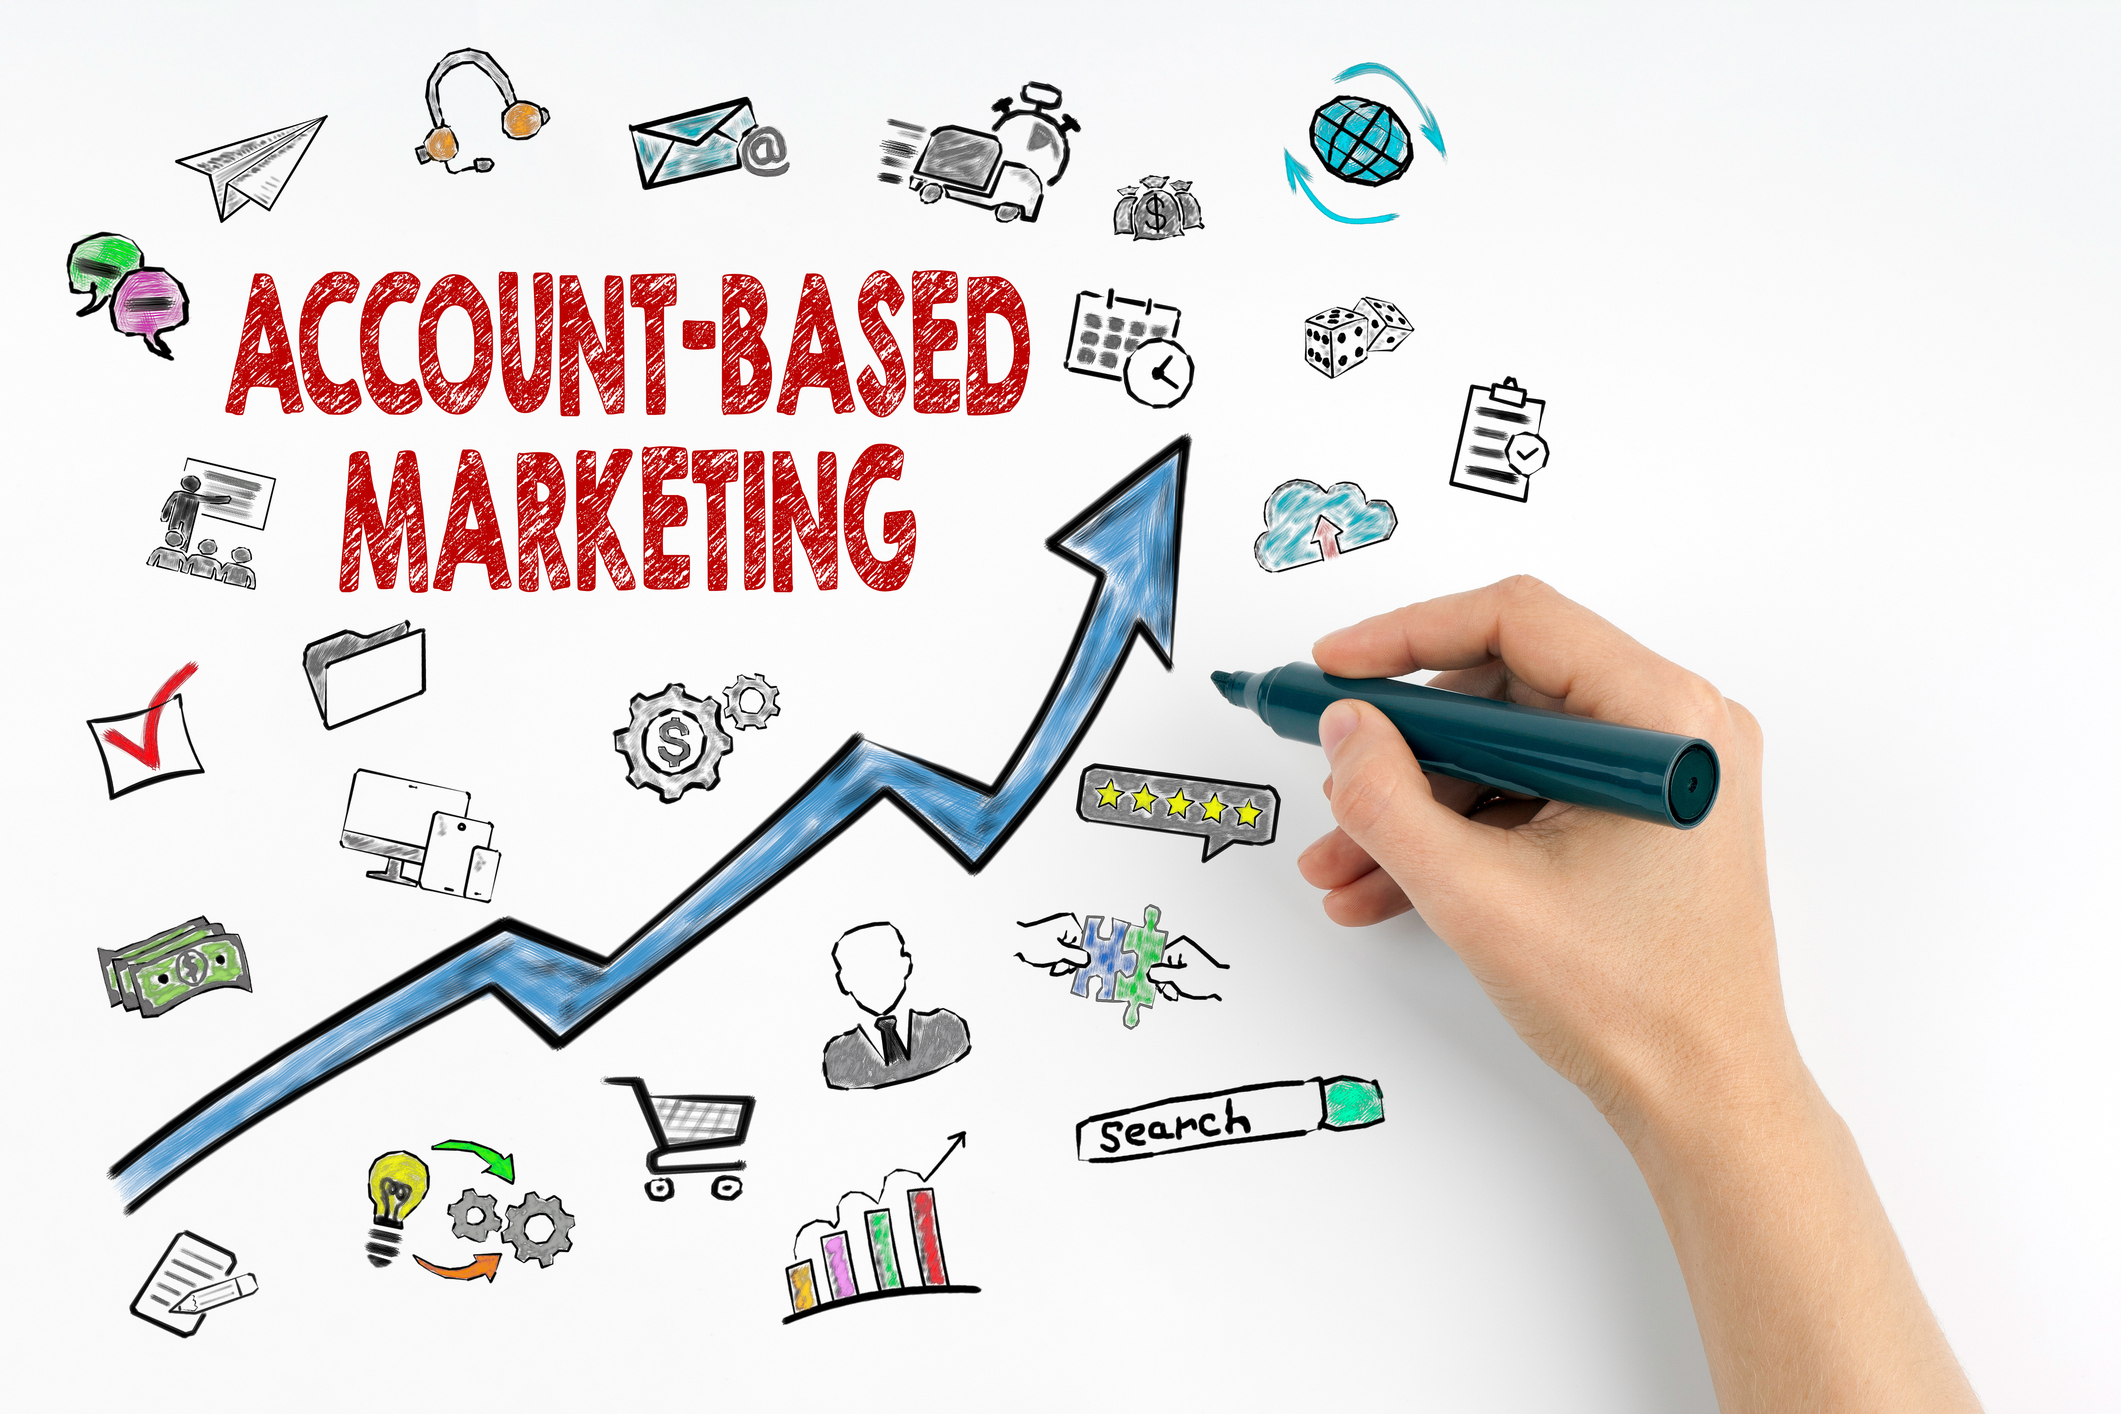 10 Excellent examples of Account-Based Marketing done right